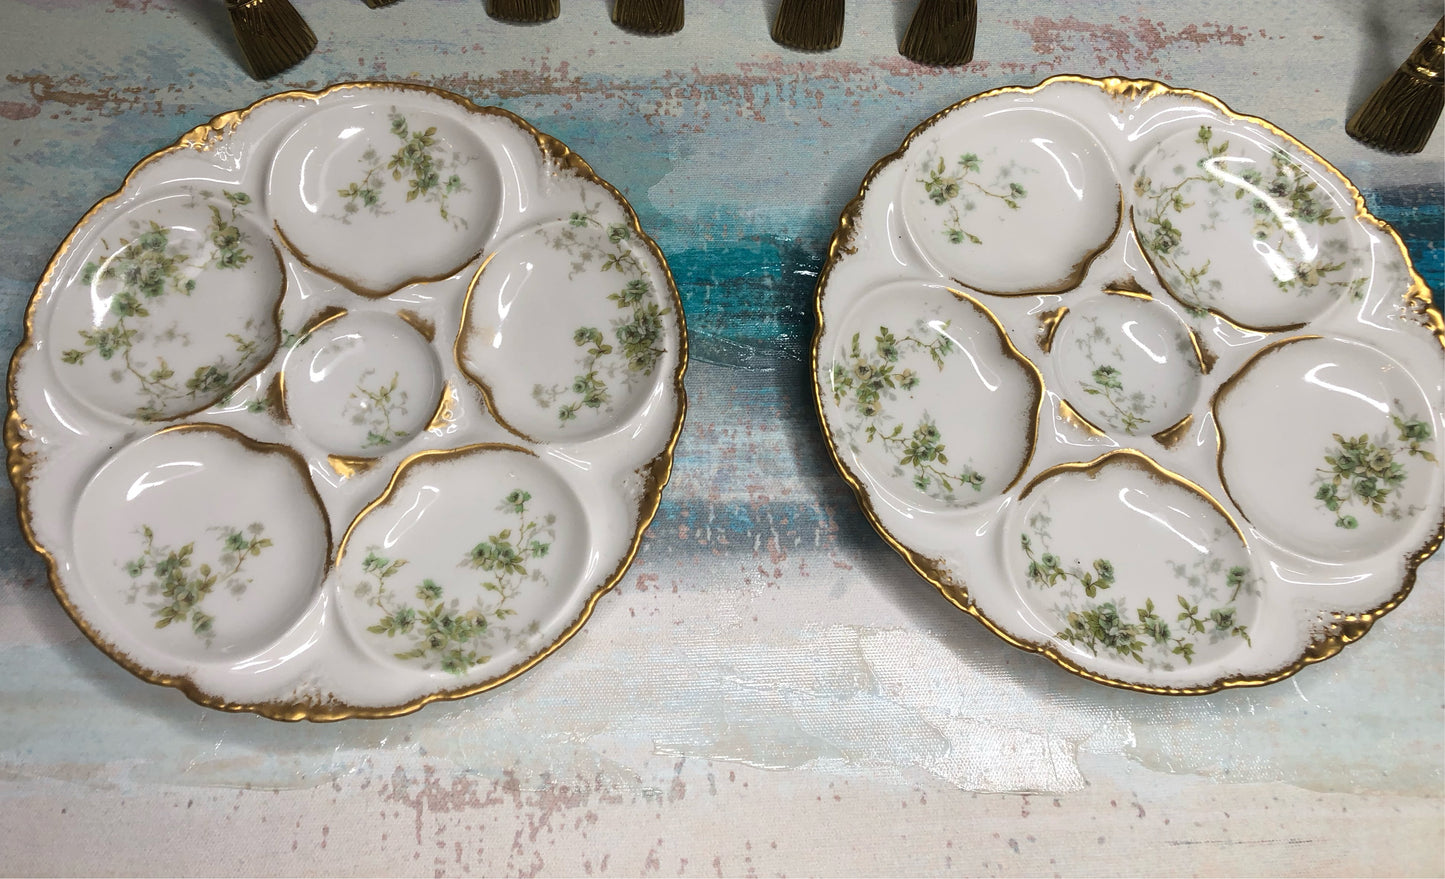 Antique Haviland Limoges Oyster Plate with beautiful green flowers and gold detailing - Excellent condition!